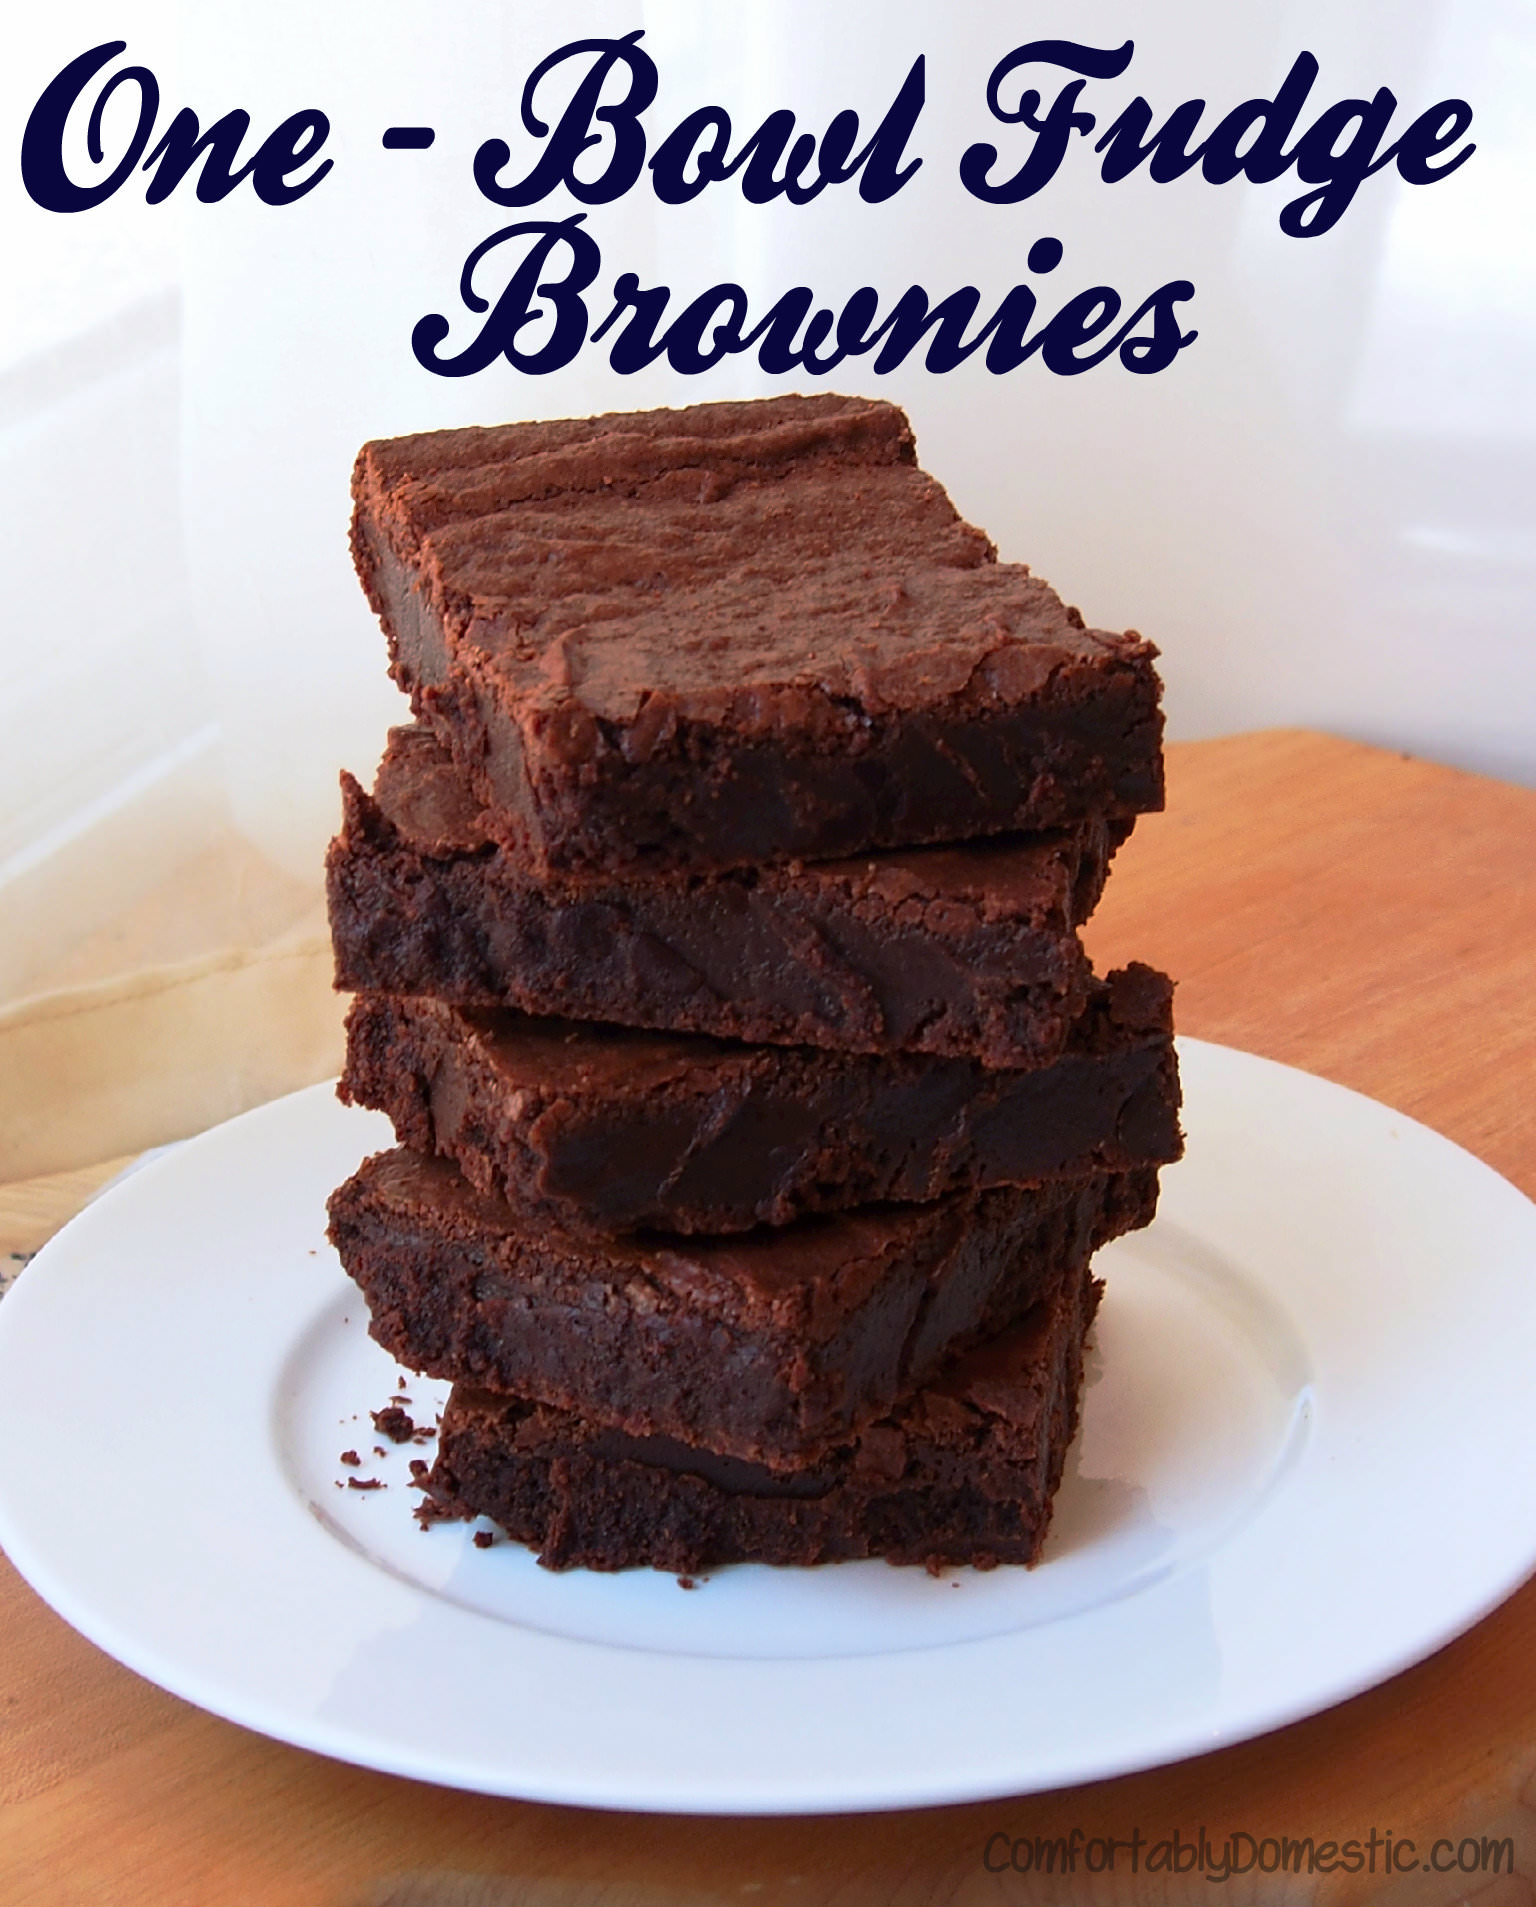 One Bowl Fudge Brownies from scratch are just as easy as making a boxed mix! | ComfortablyDomestic.com